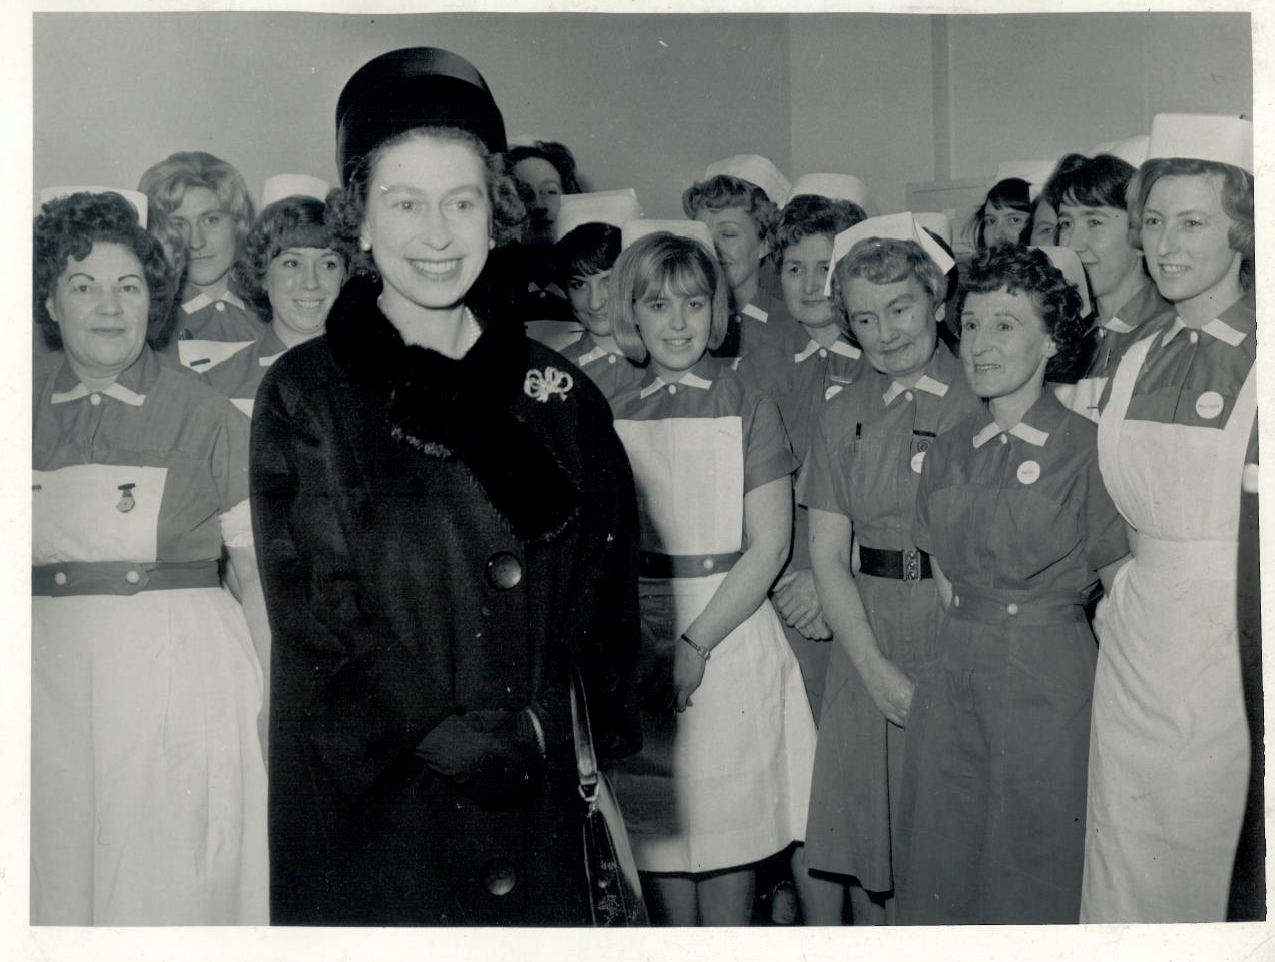 Her Majesty the Queen visiting blood donation centre in 1965